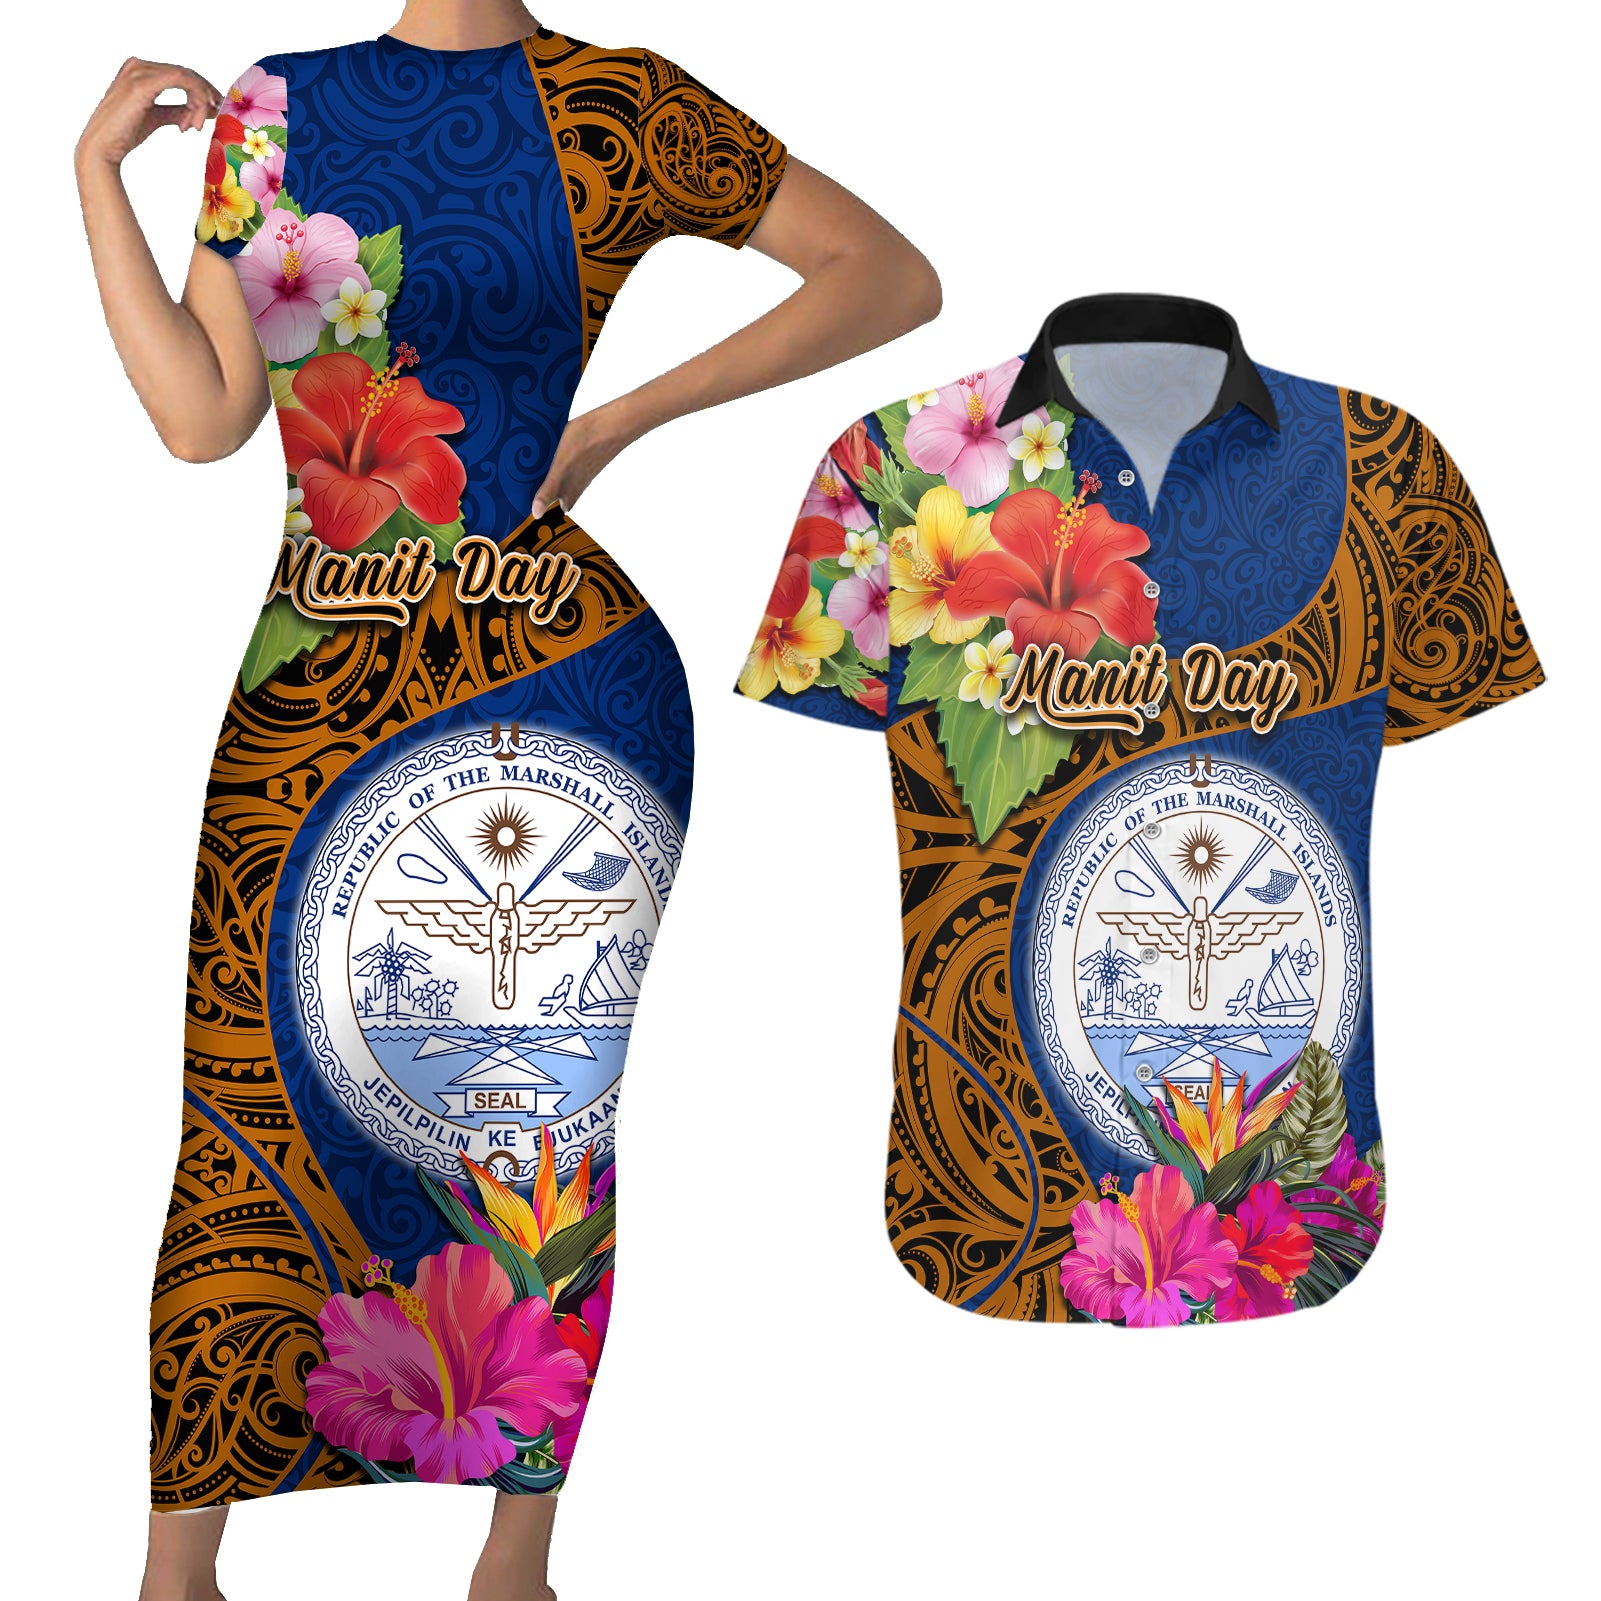 personalised-marshall-islands-manit-day-couples-matching-short-sleeve-bodycon-dress-and-hawaiian-shirt-marshall-seal-mix-hibiscus-flower-maori-pattern-style